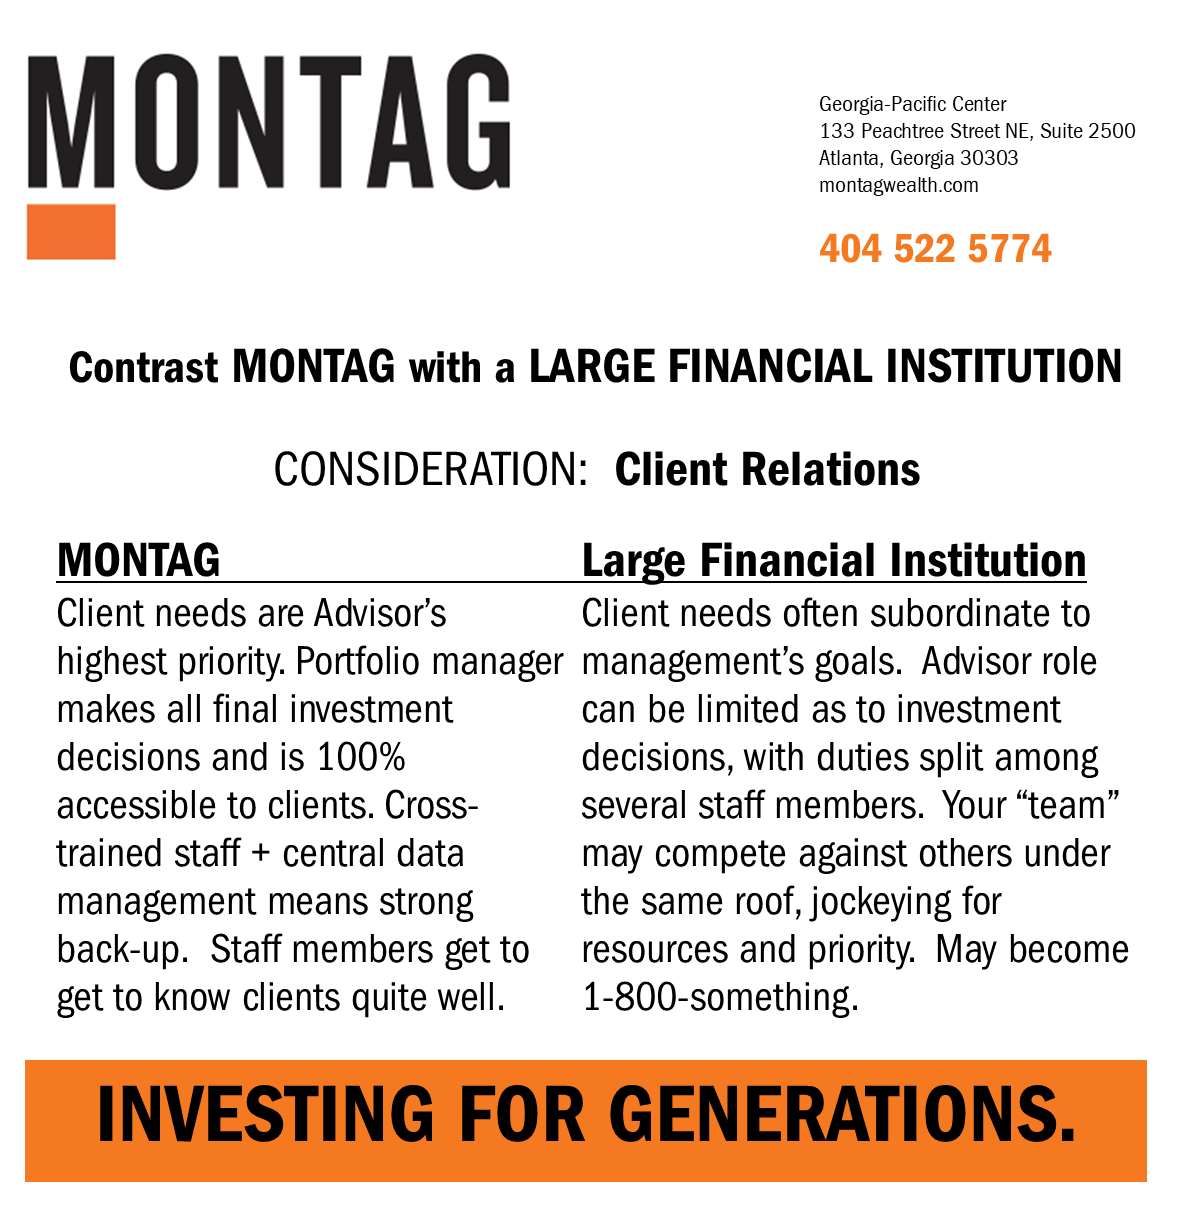 Contrast MONTAG with a LARGE FINANCIAL INSTITUTION - Client Relations